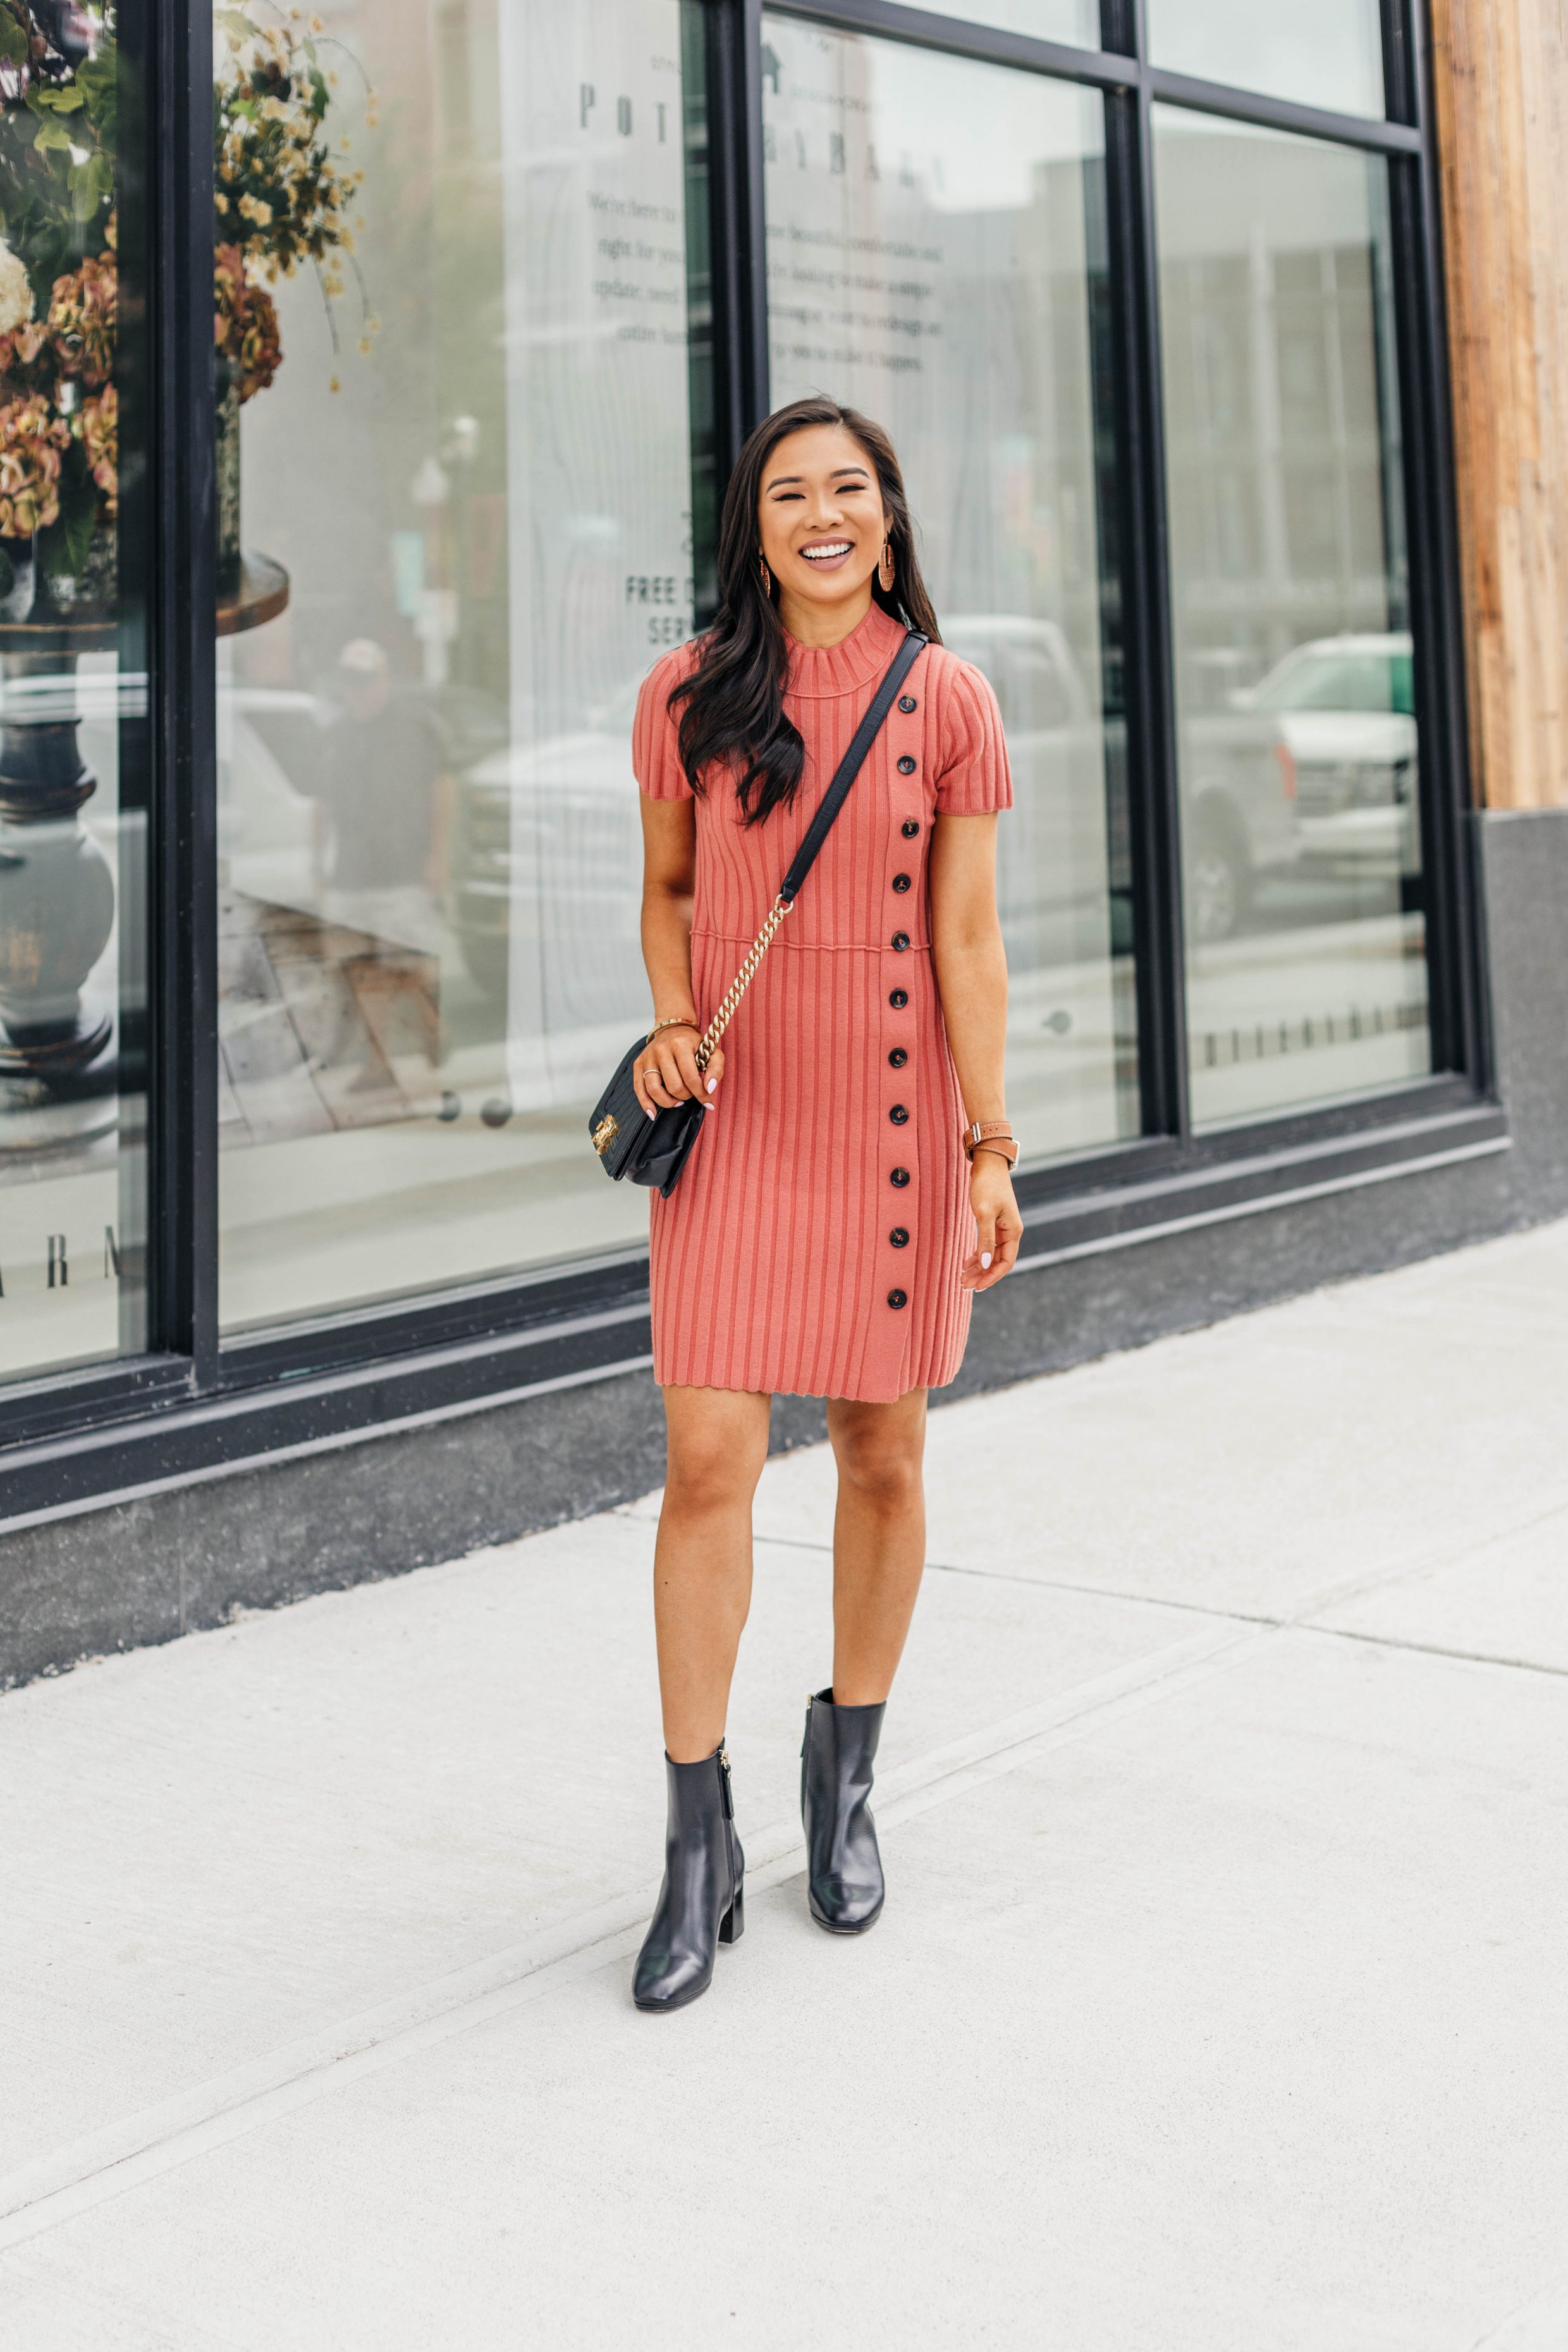 Blogger Hoang-Kim styles the Corsa bootie for fall